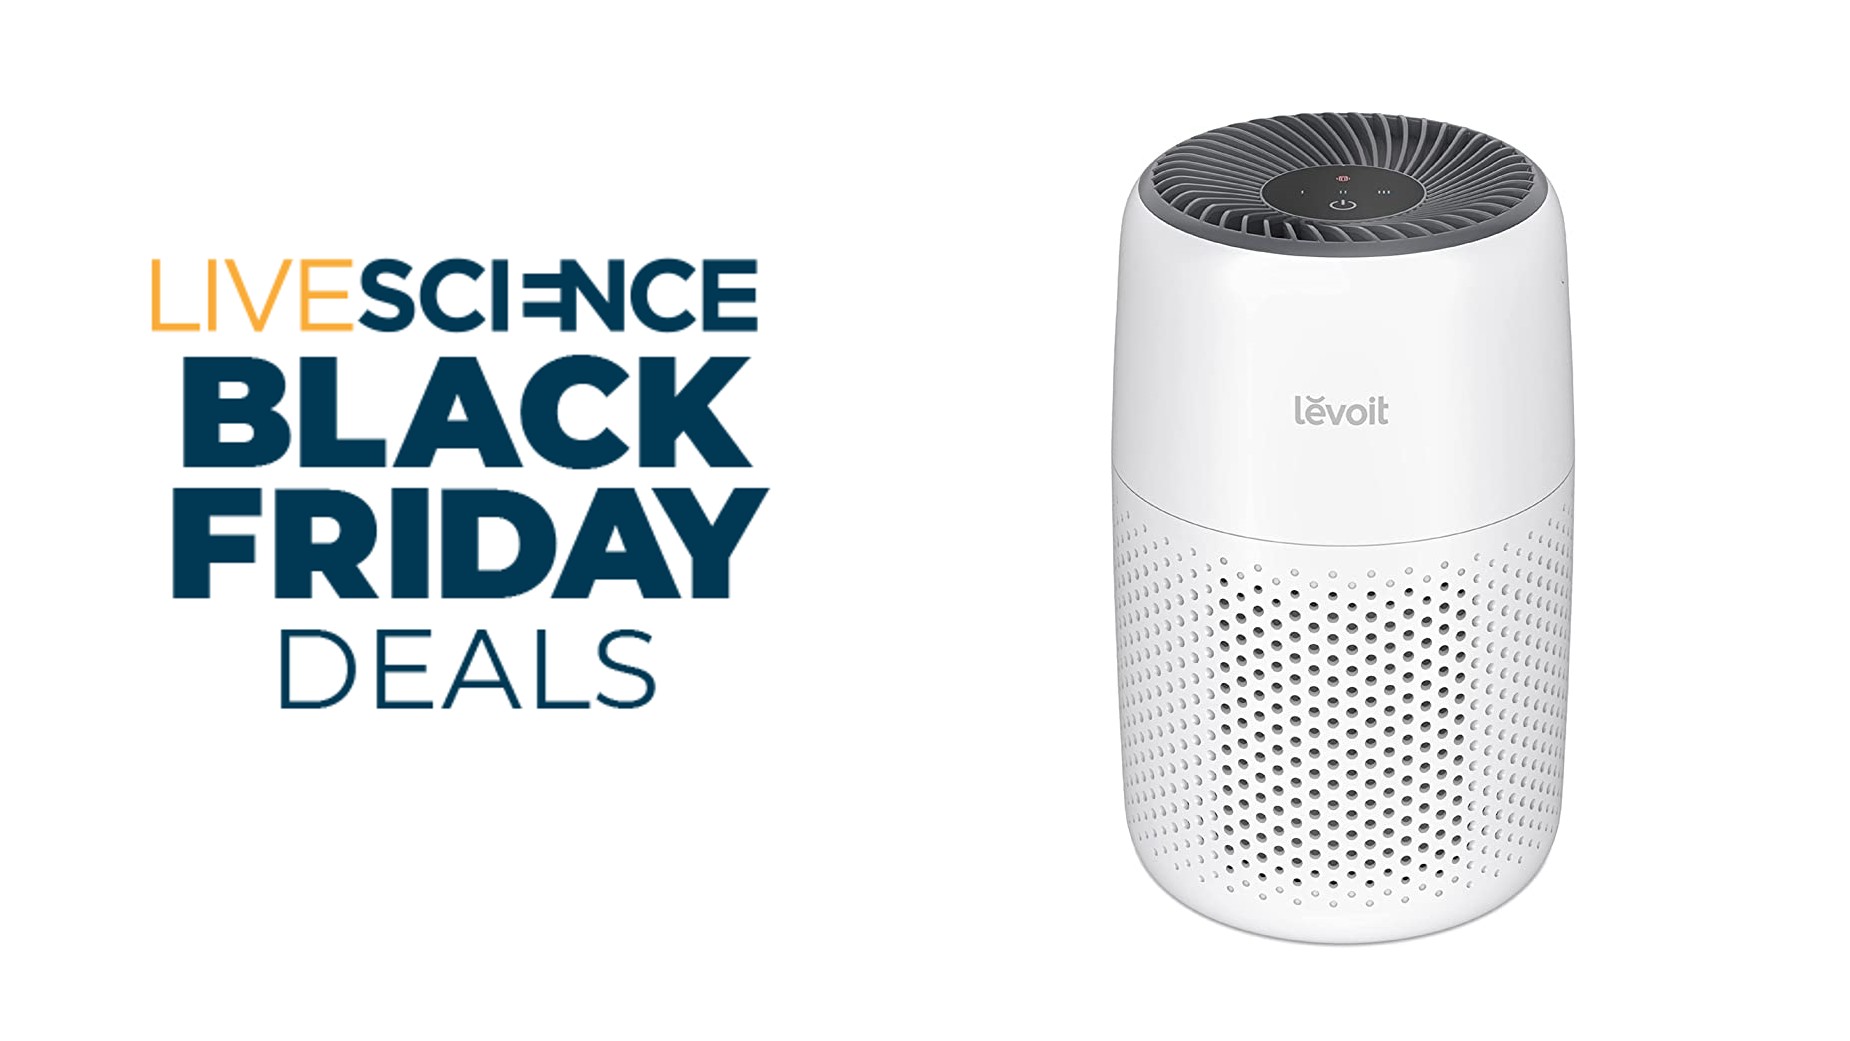 Breathe clean air for under $42 with this Cyber Monday air purifier deal